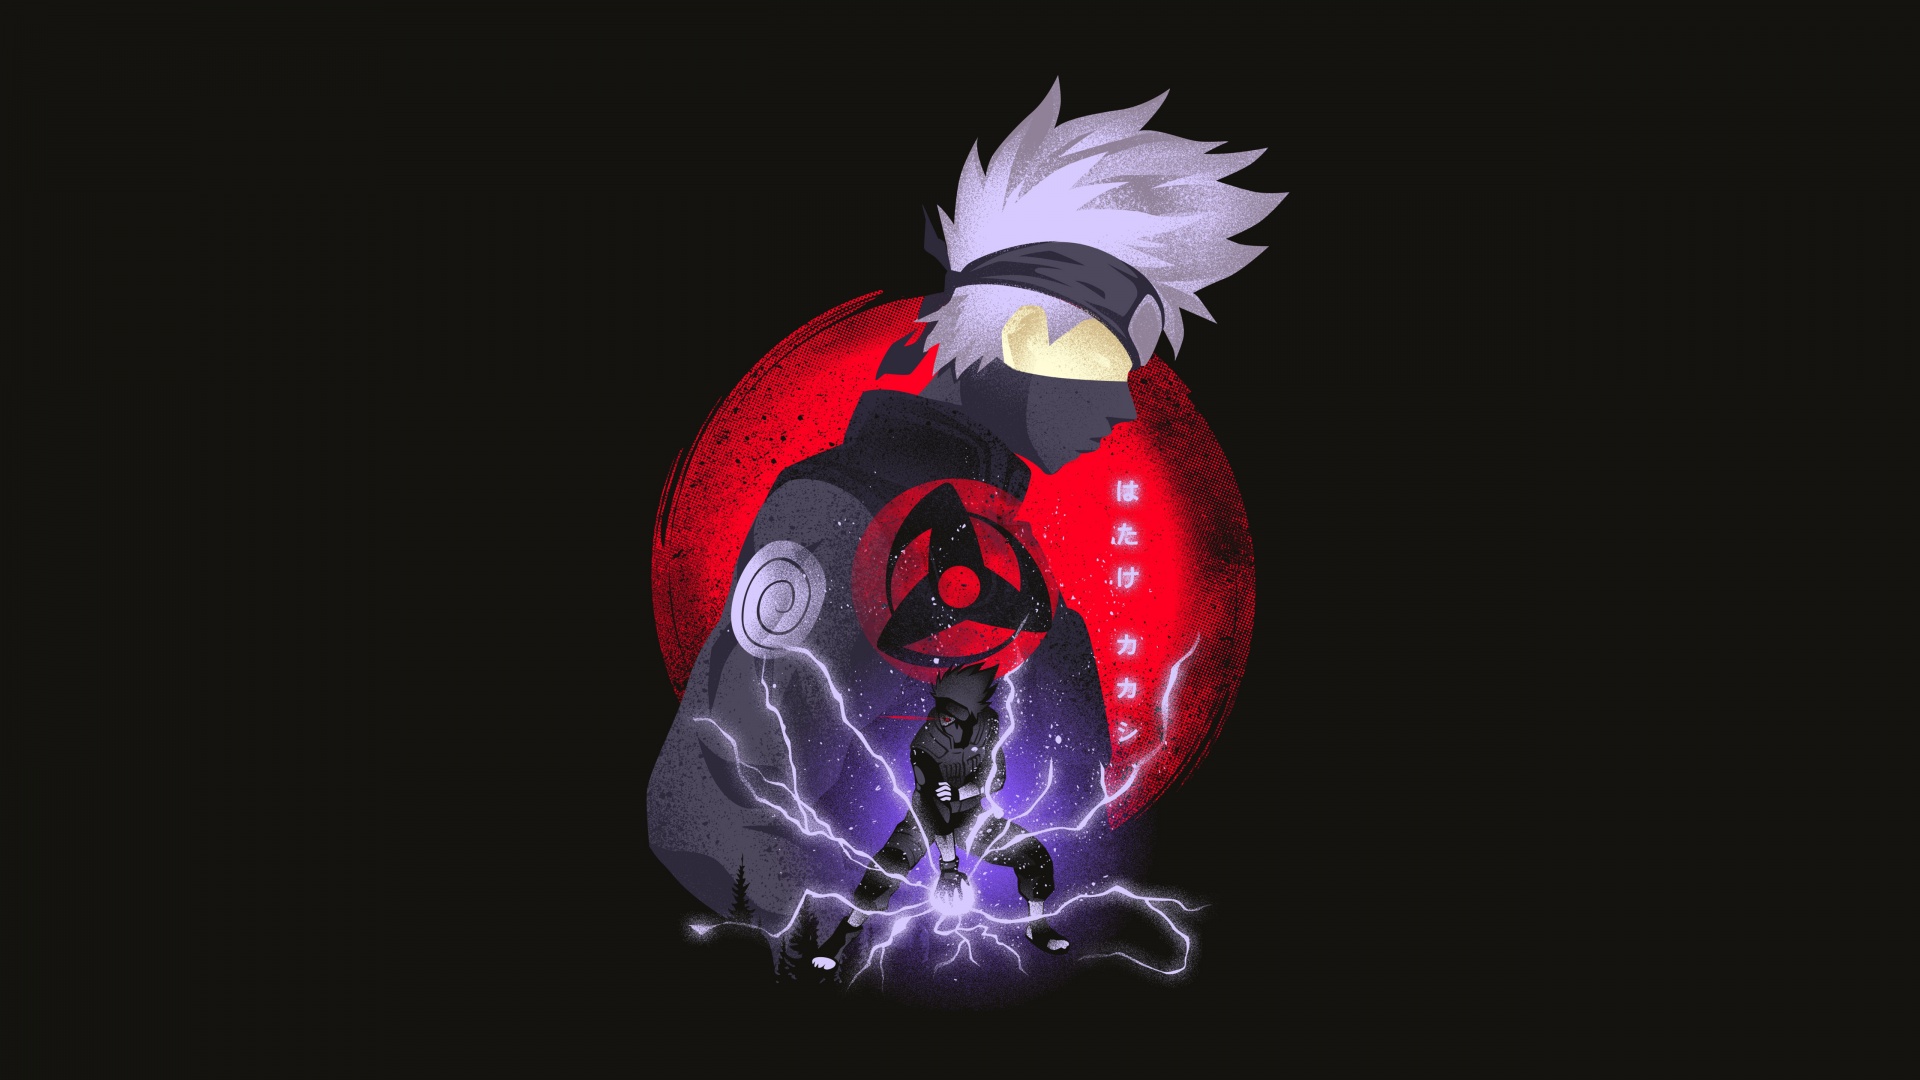 200 Sharingan Wallpapers for iPhone and Android by Steven David